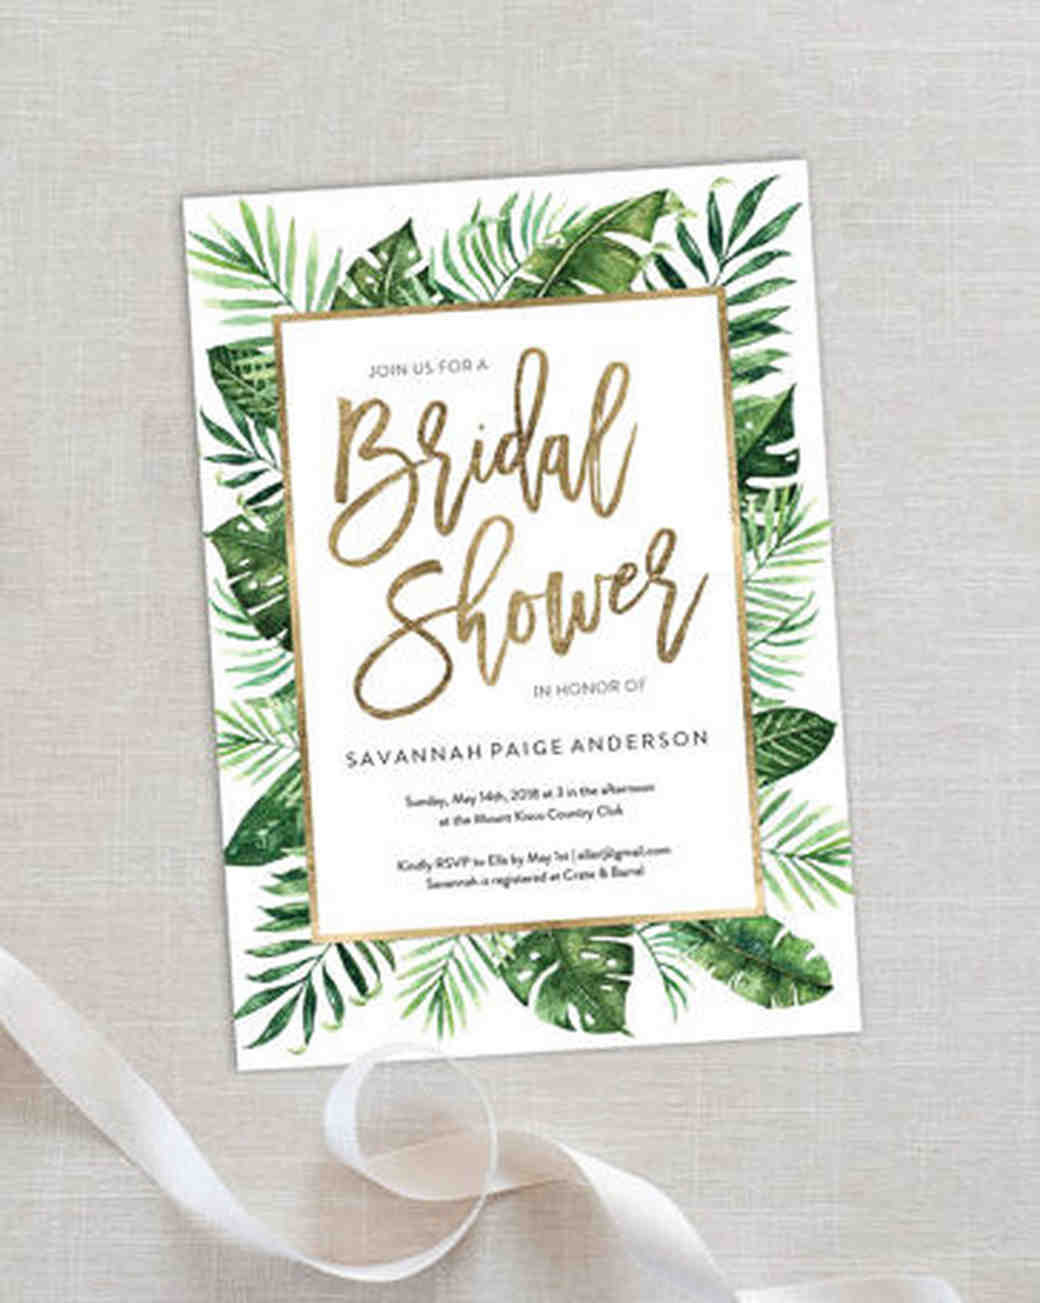 Free Wedding Shower Invitations
 10 Affordable Bridal Shower Invitations You Can Print at